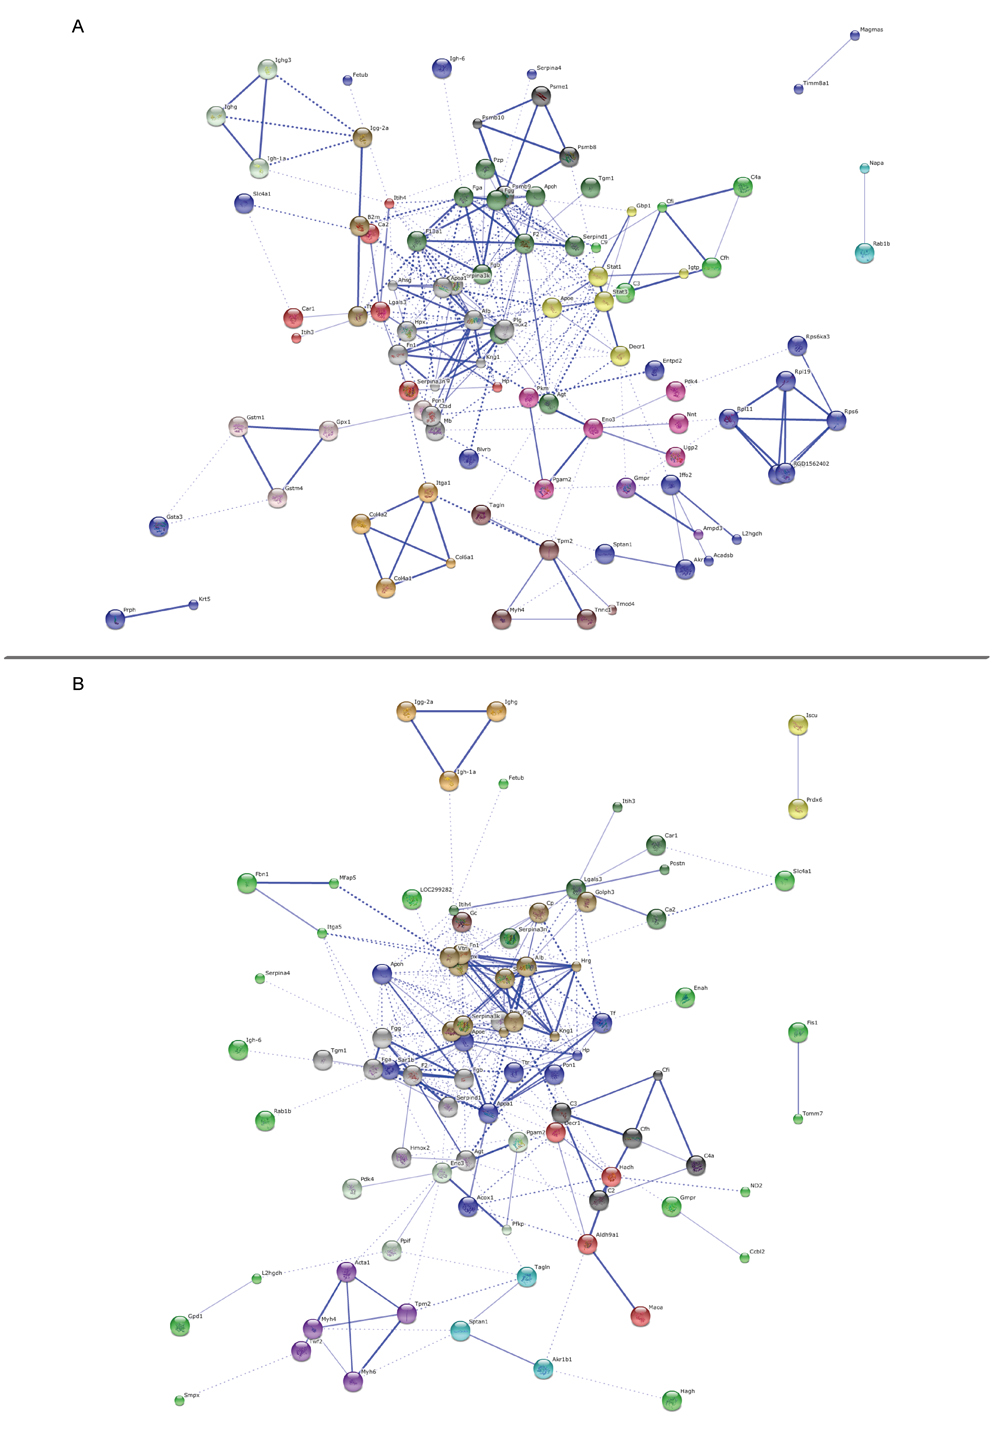 Protein-protein interaction networks.